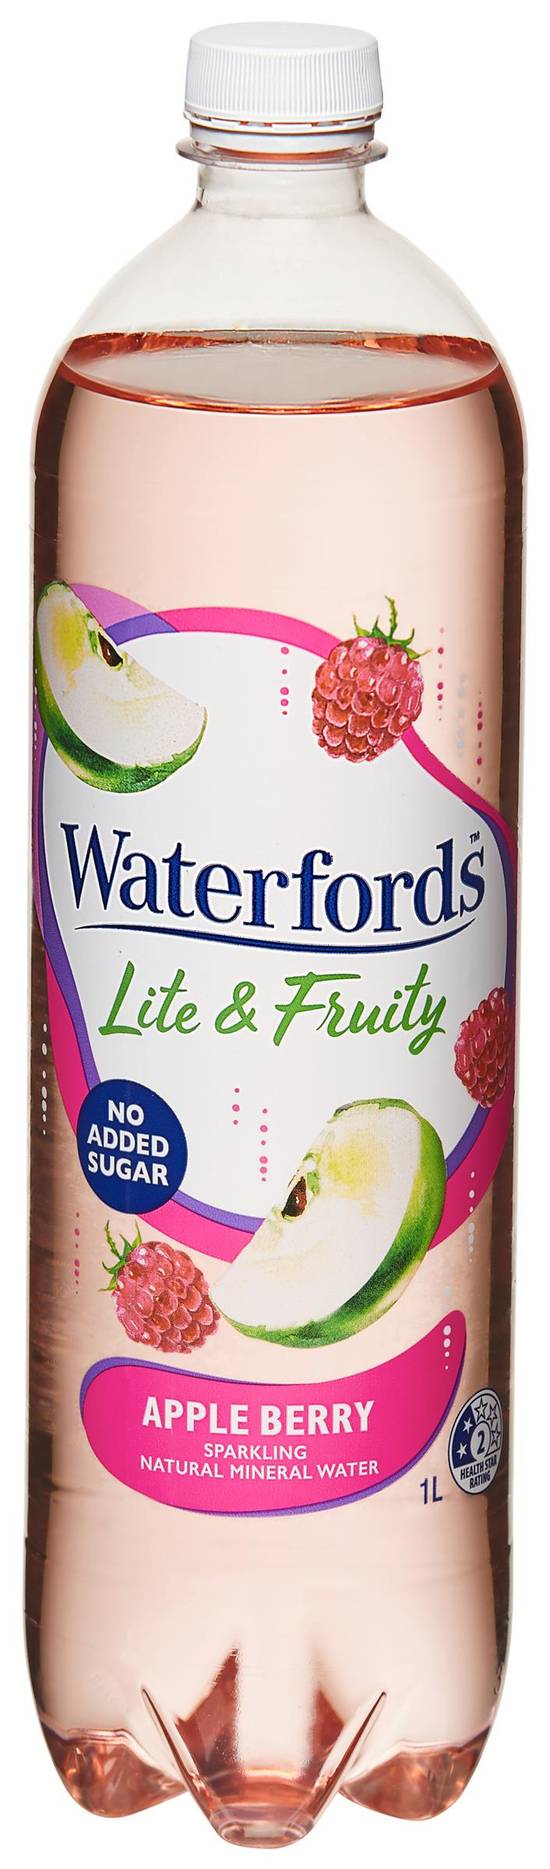 Waterfords Sparkling Natural Apple Berry Mineral Water 1 L